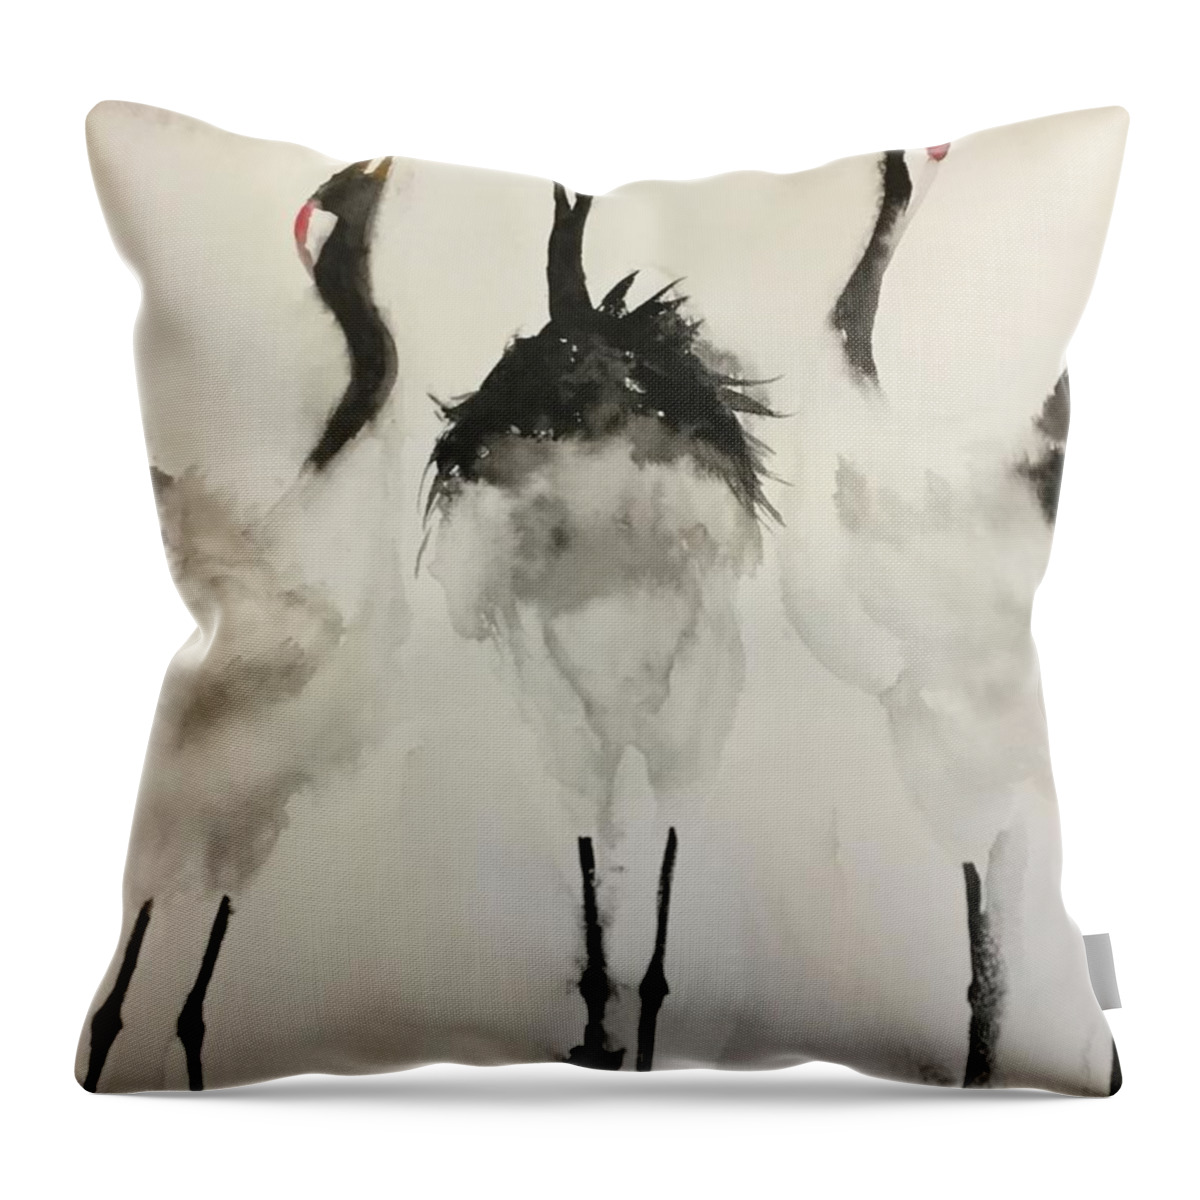 1142021 Throw Pillow featuring the painting 1142021 by Han in Huang wong